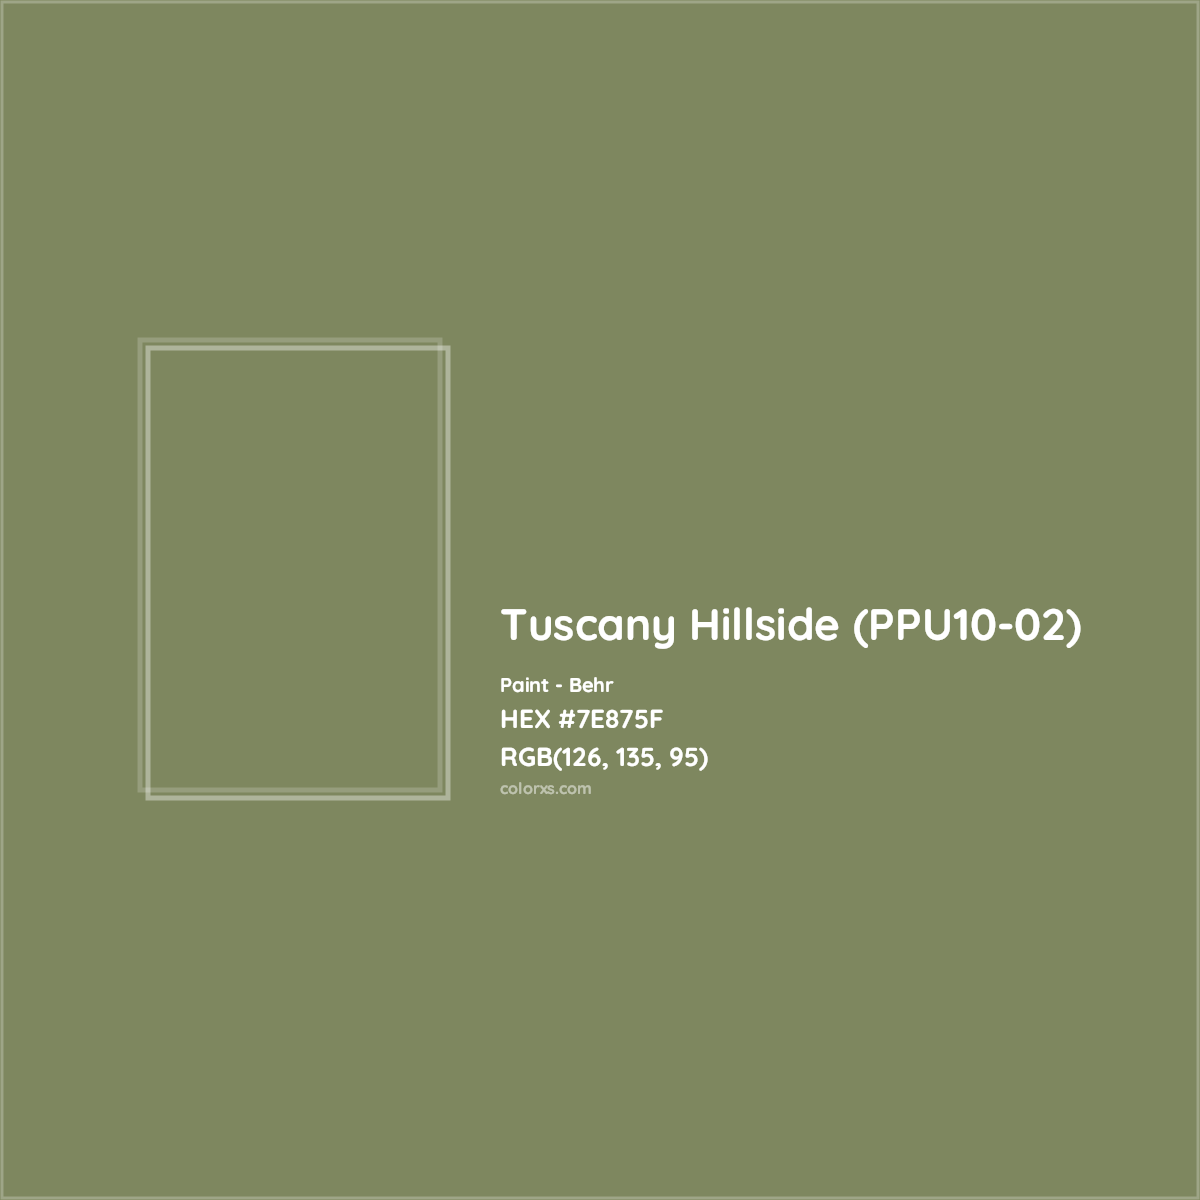 HEX #7E875F Tuscany Hillside (PPU10-02) Paint Behr - Color Code